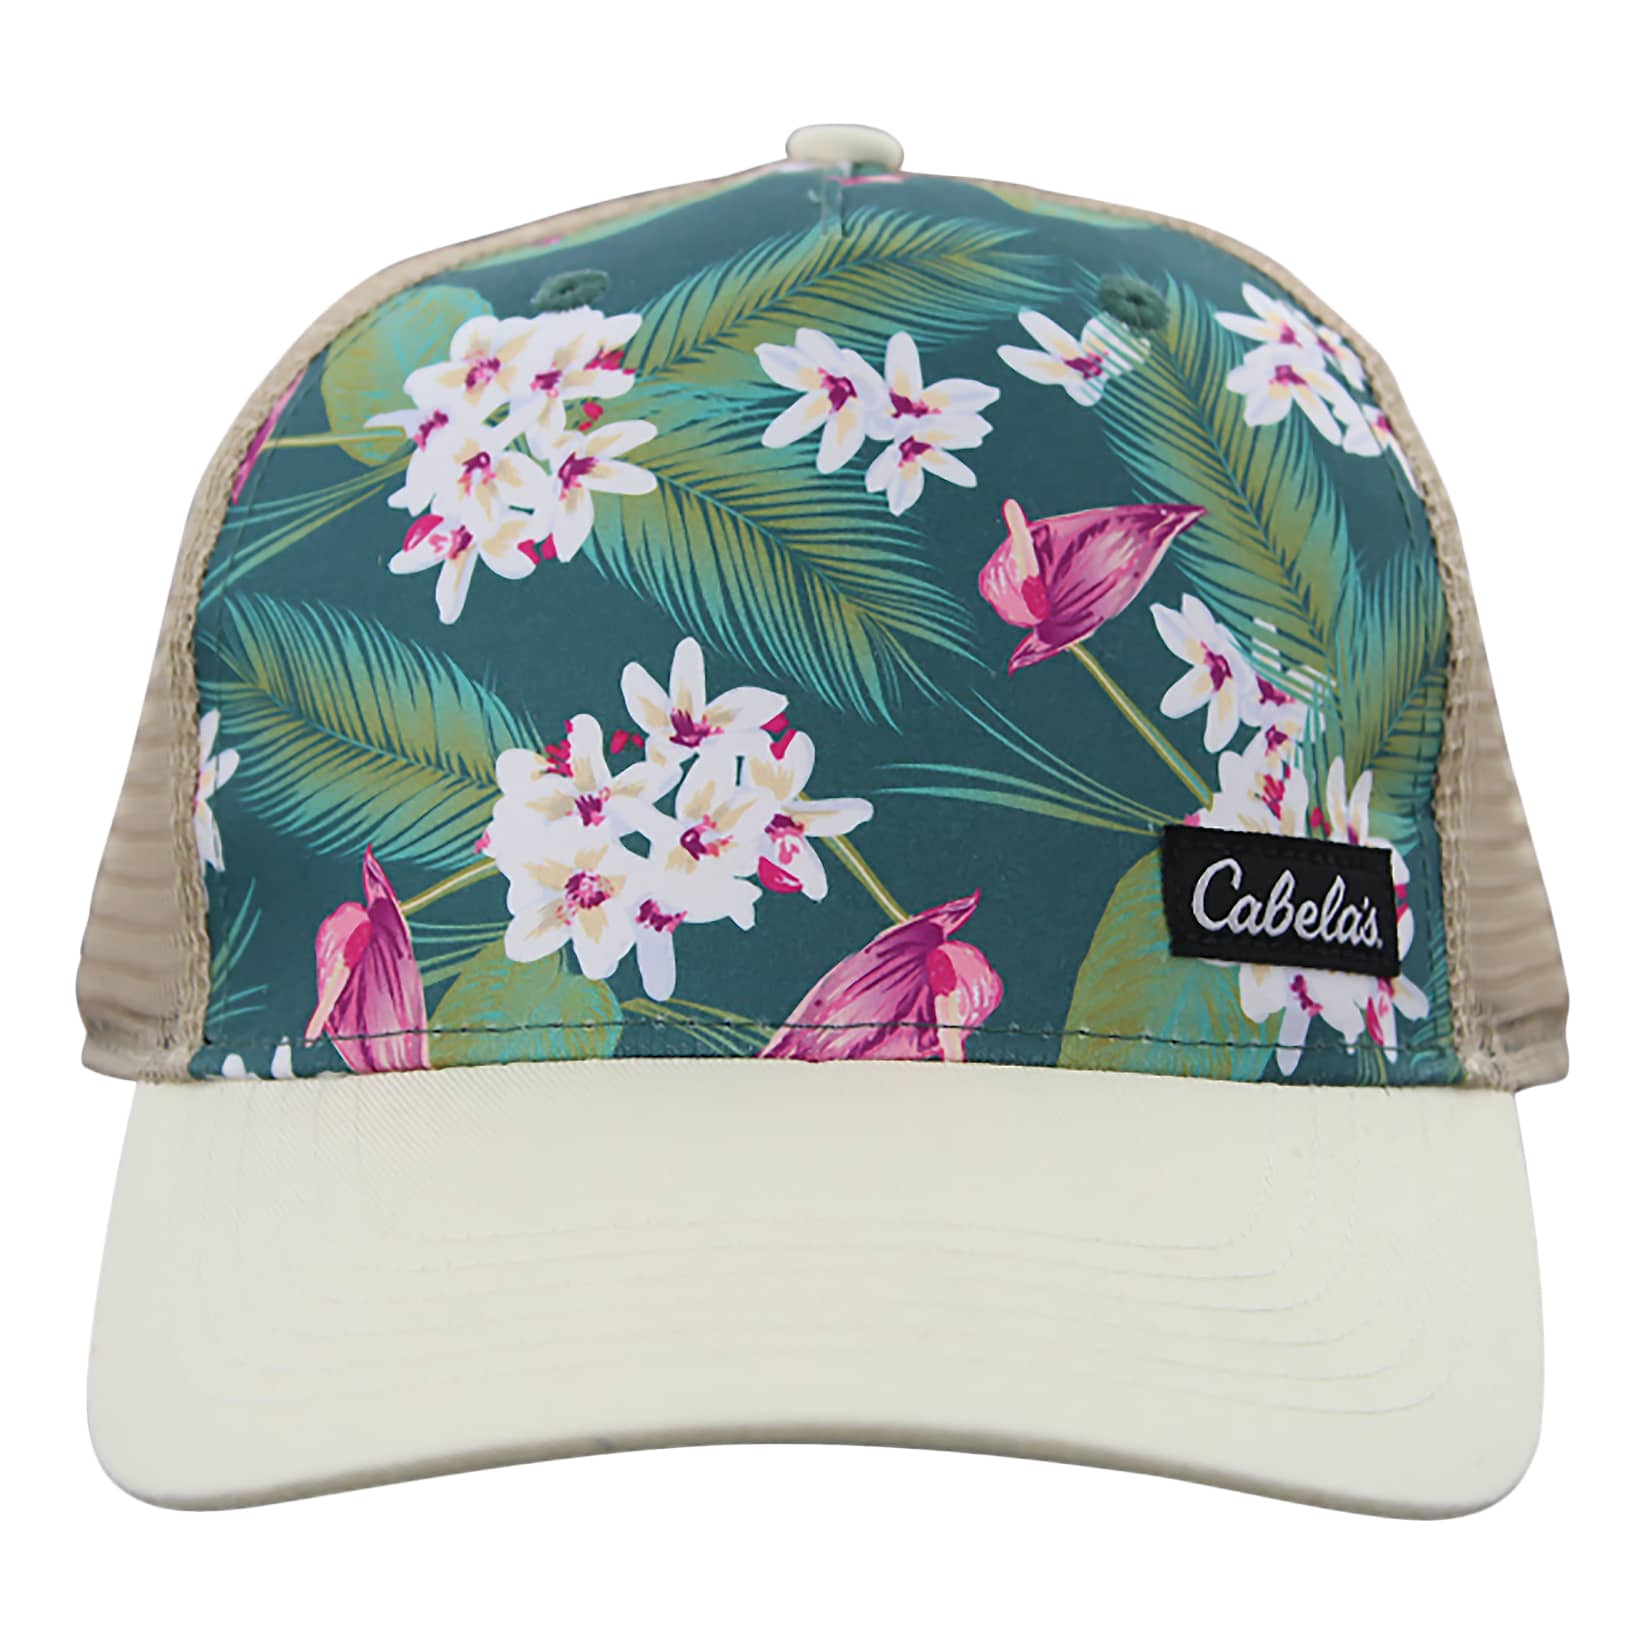 Cabela's Pink Hats for Women